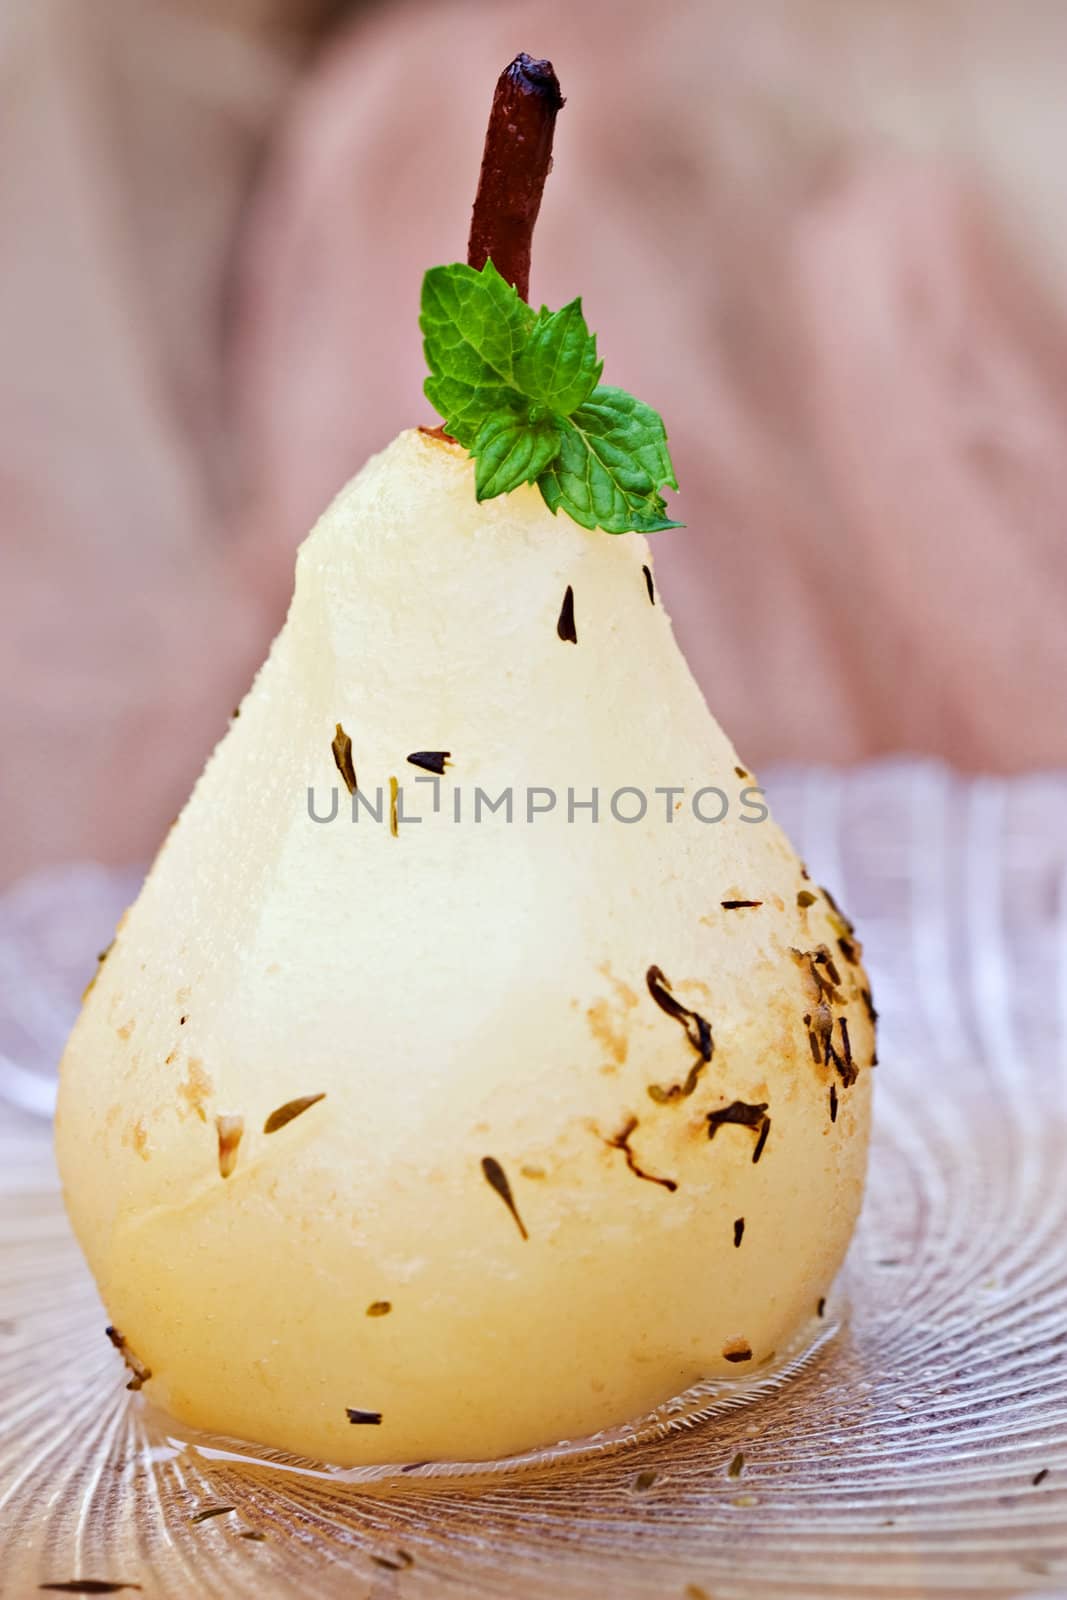 Poached Pear by StephanieFrey